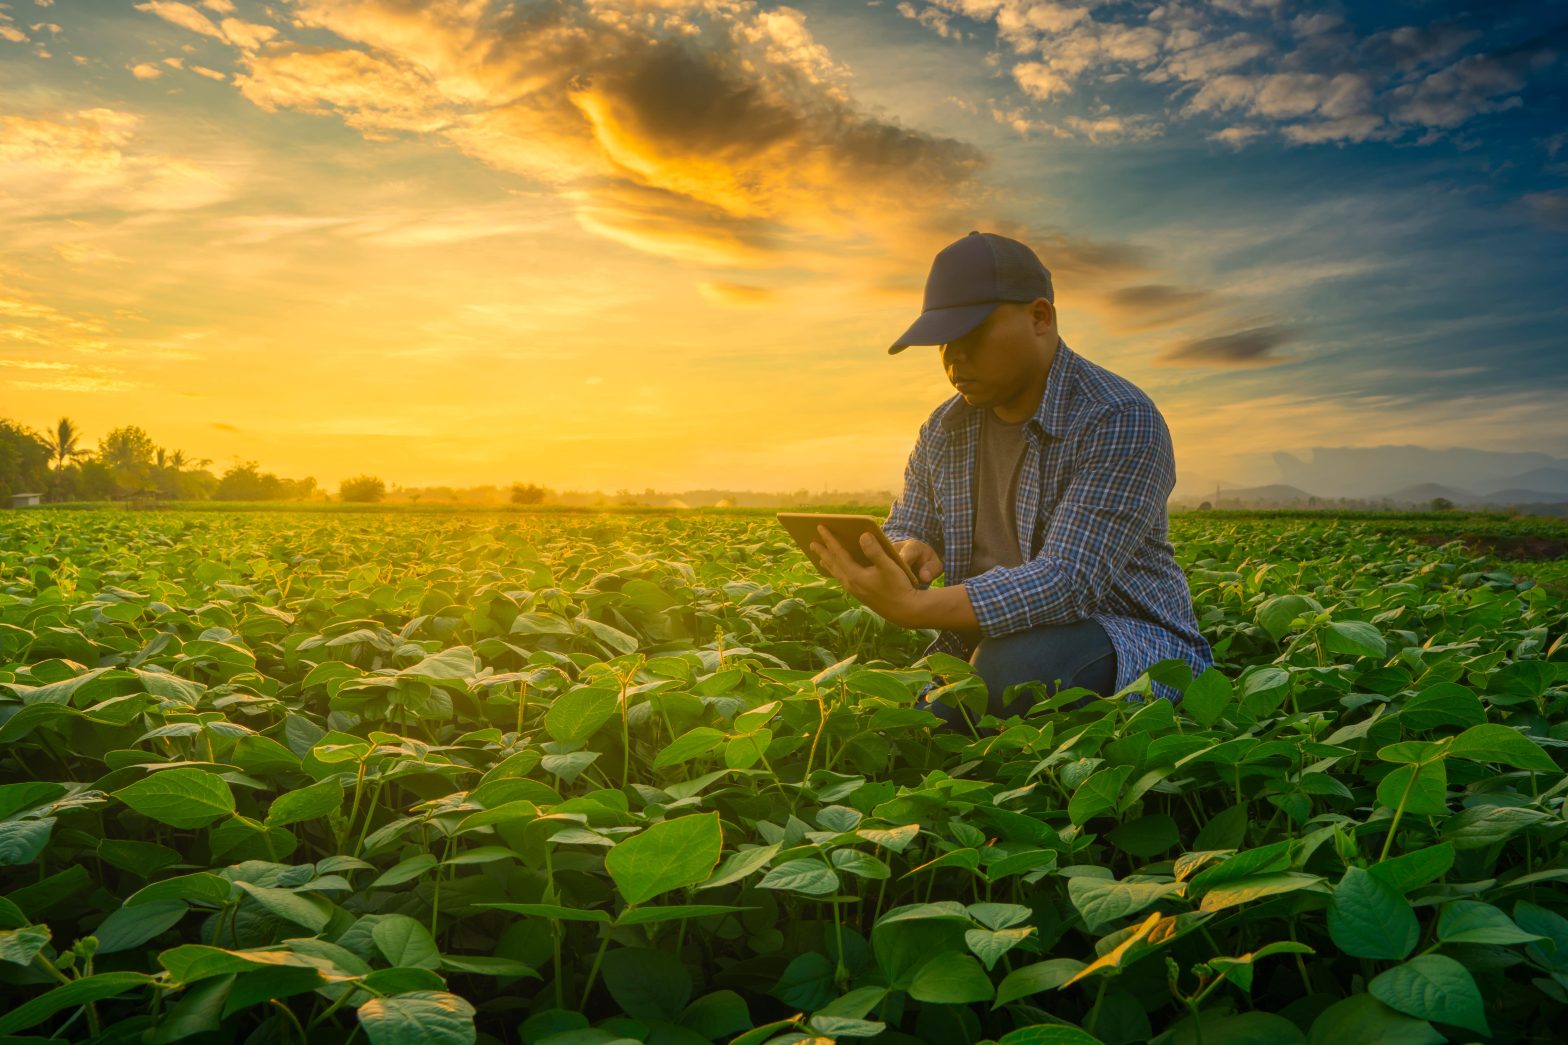 A Framework for Future Cybersecurity in Agriculture